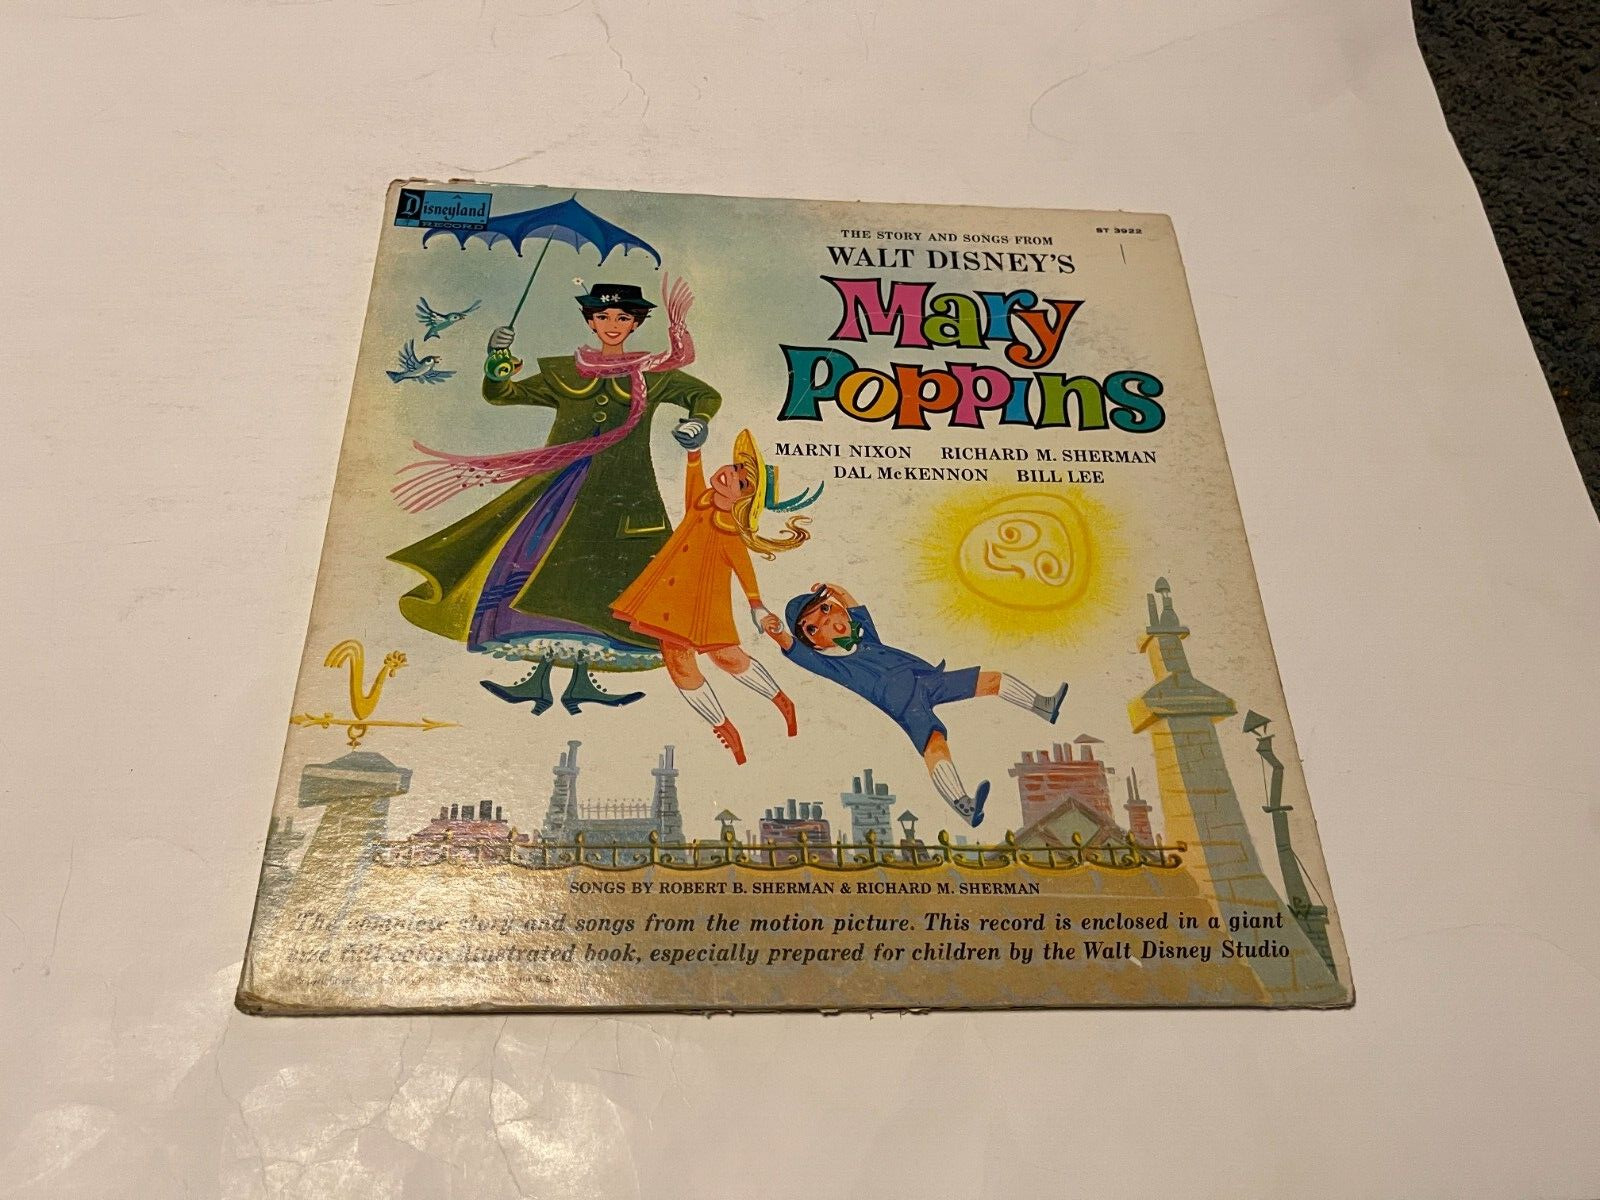 Walt Disney’s Mary Poppins Vinyl Record Album and Book, 1964 *FREE SHIPPING*